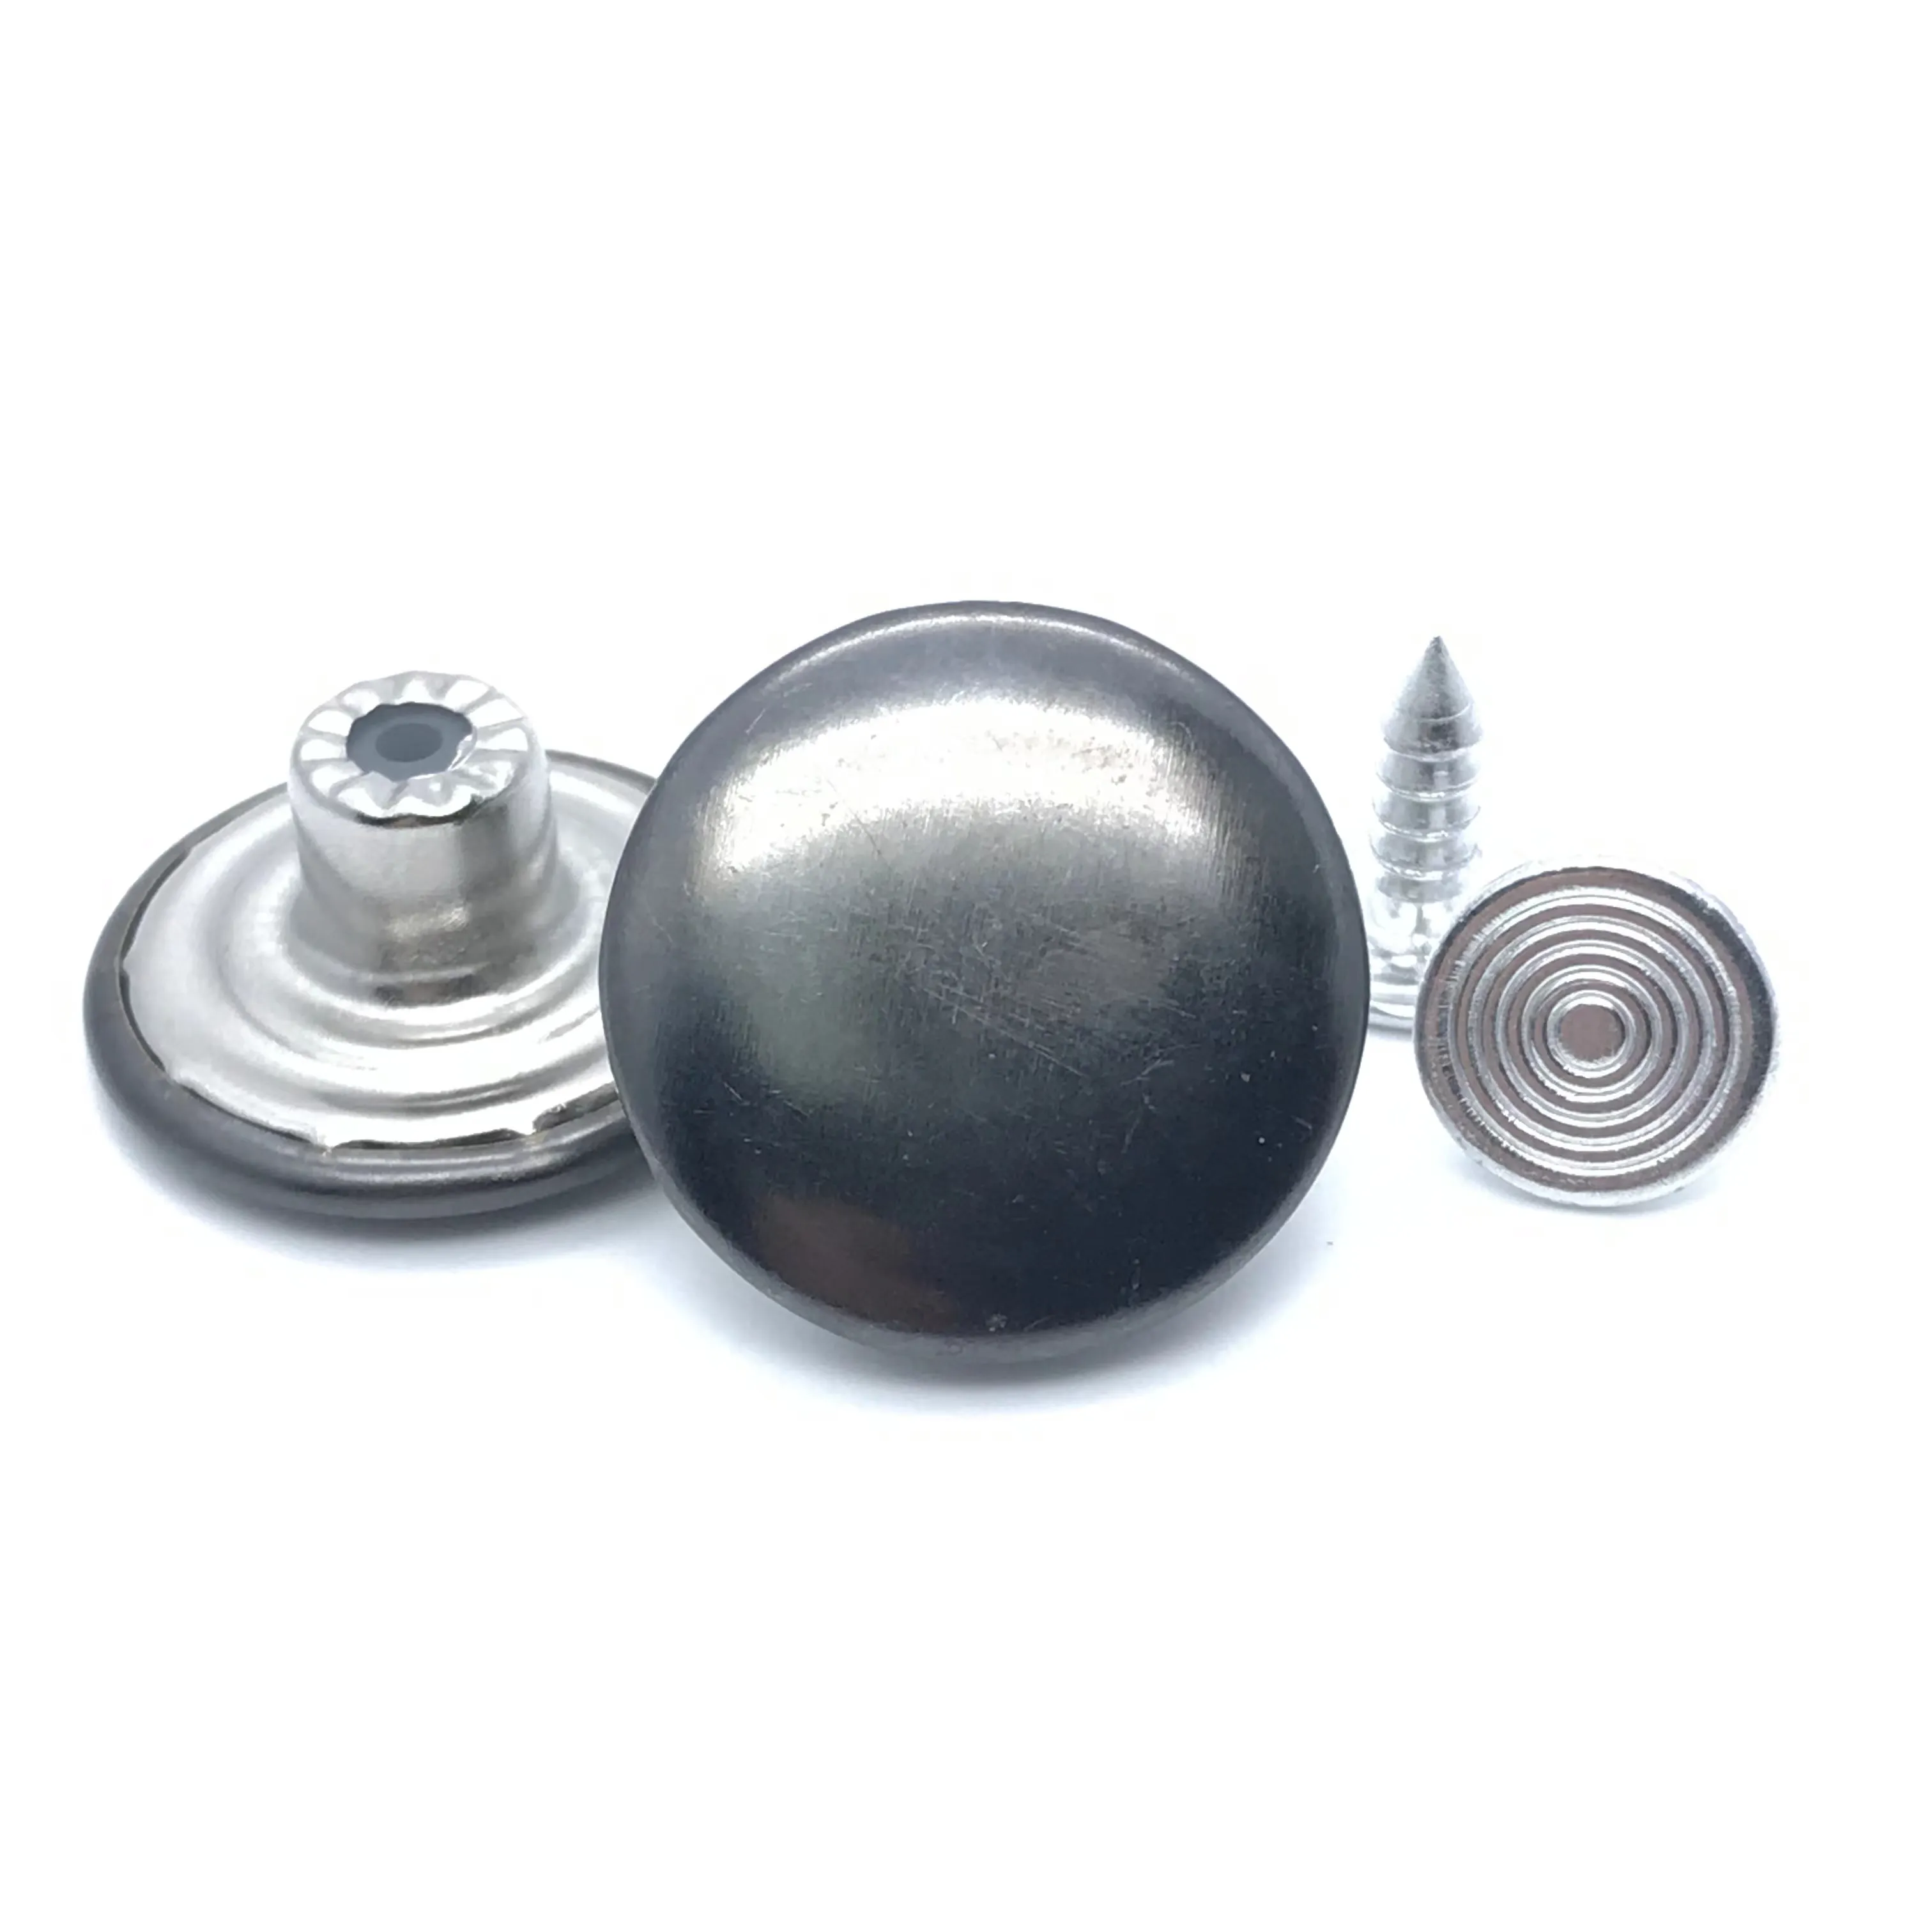 MB-3701 high quality electroplated metal customize overalls electroplate color regular shape shank buttons for clothing